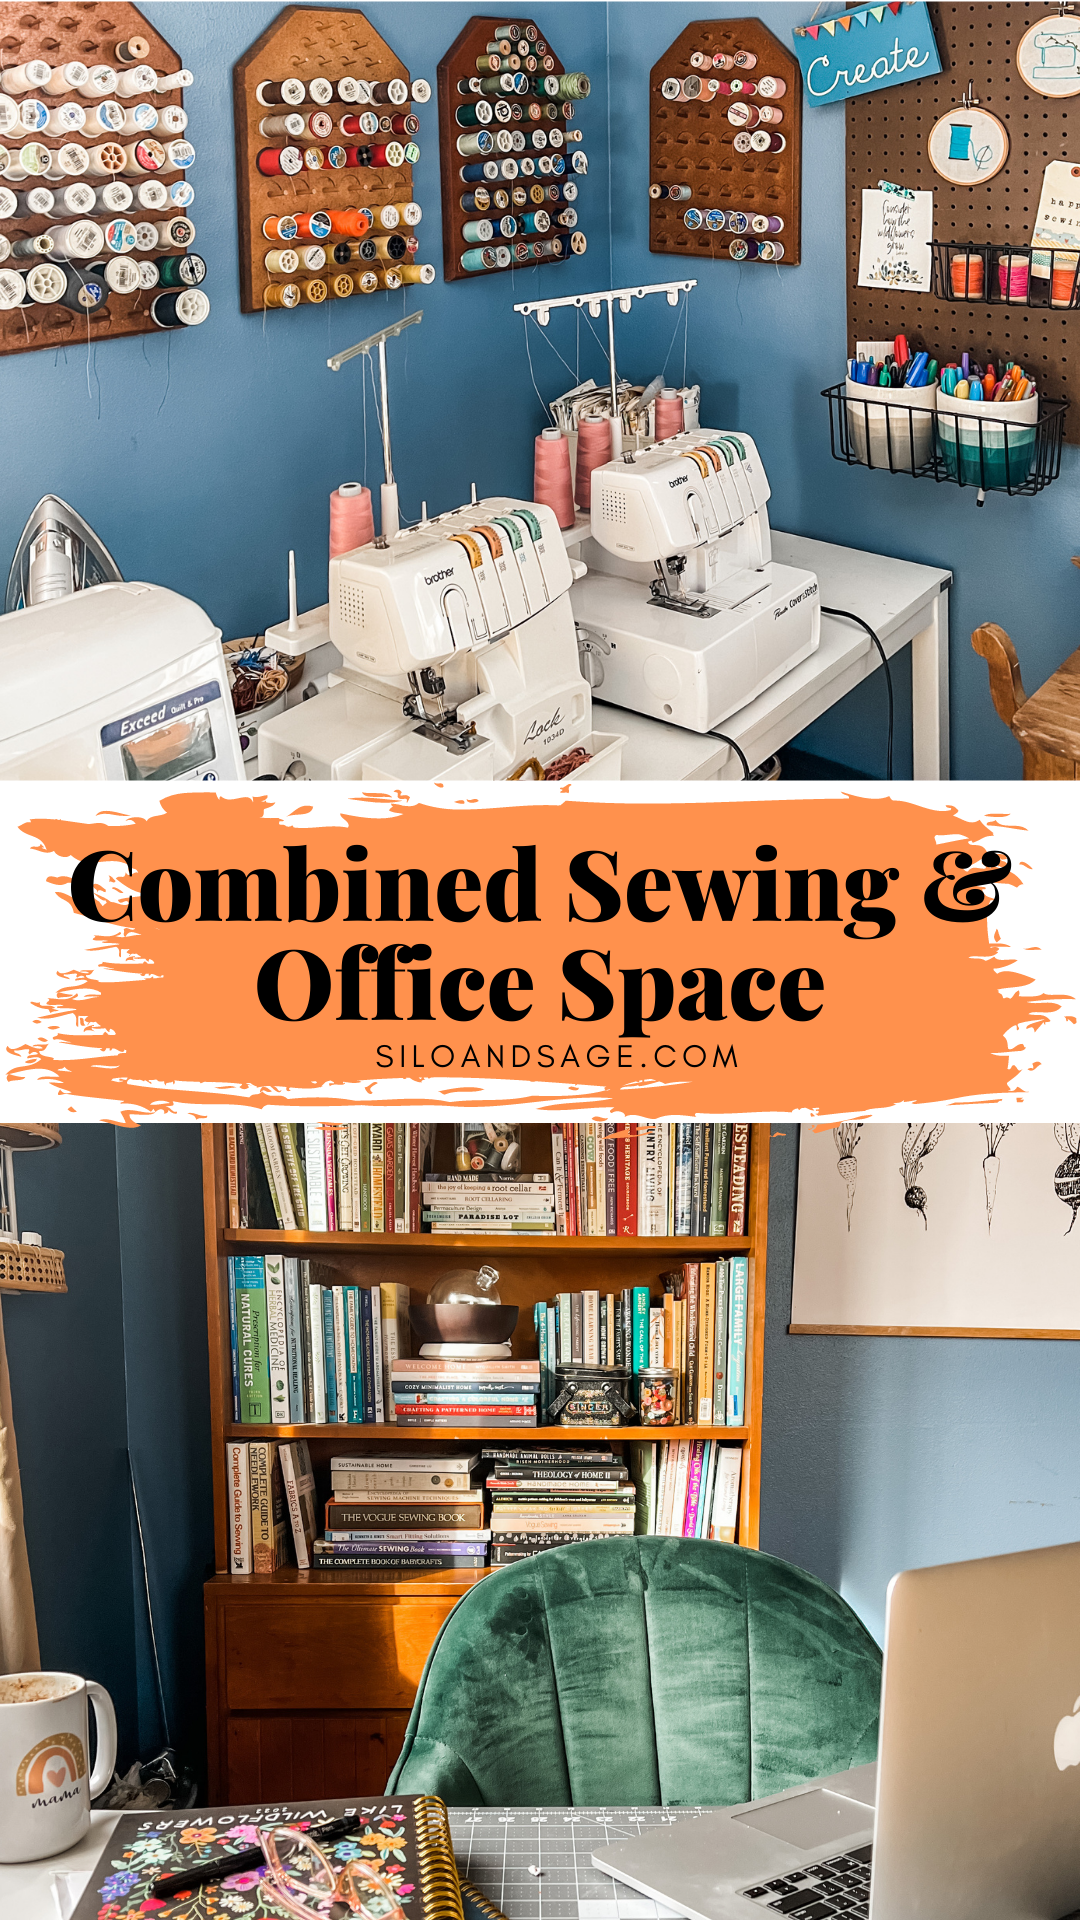 Combined sewing and office space